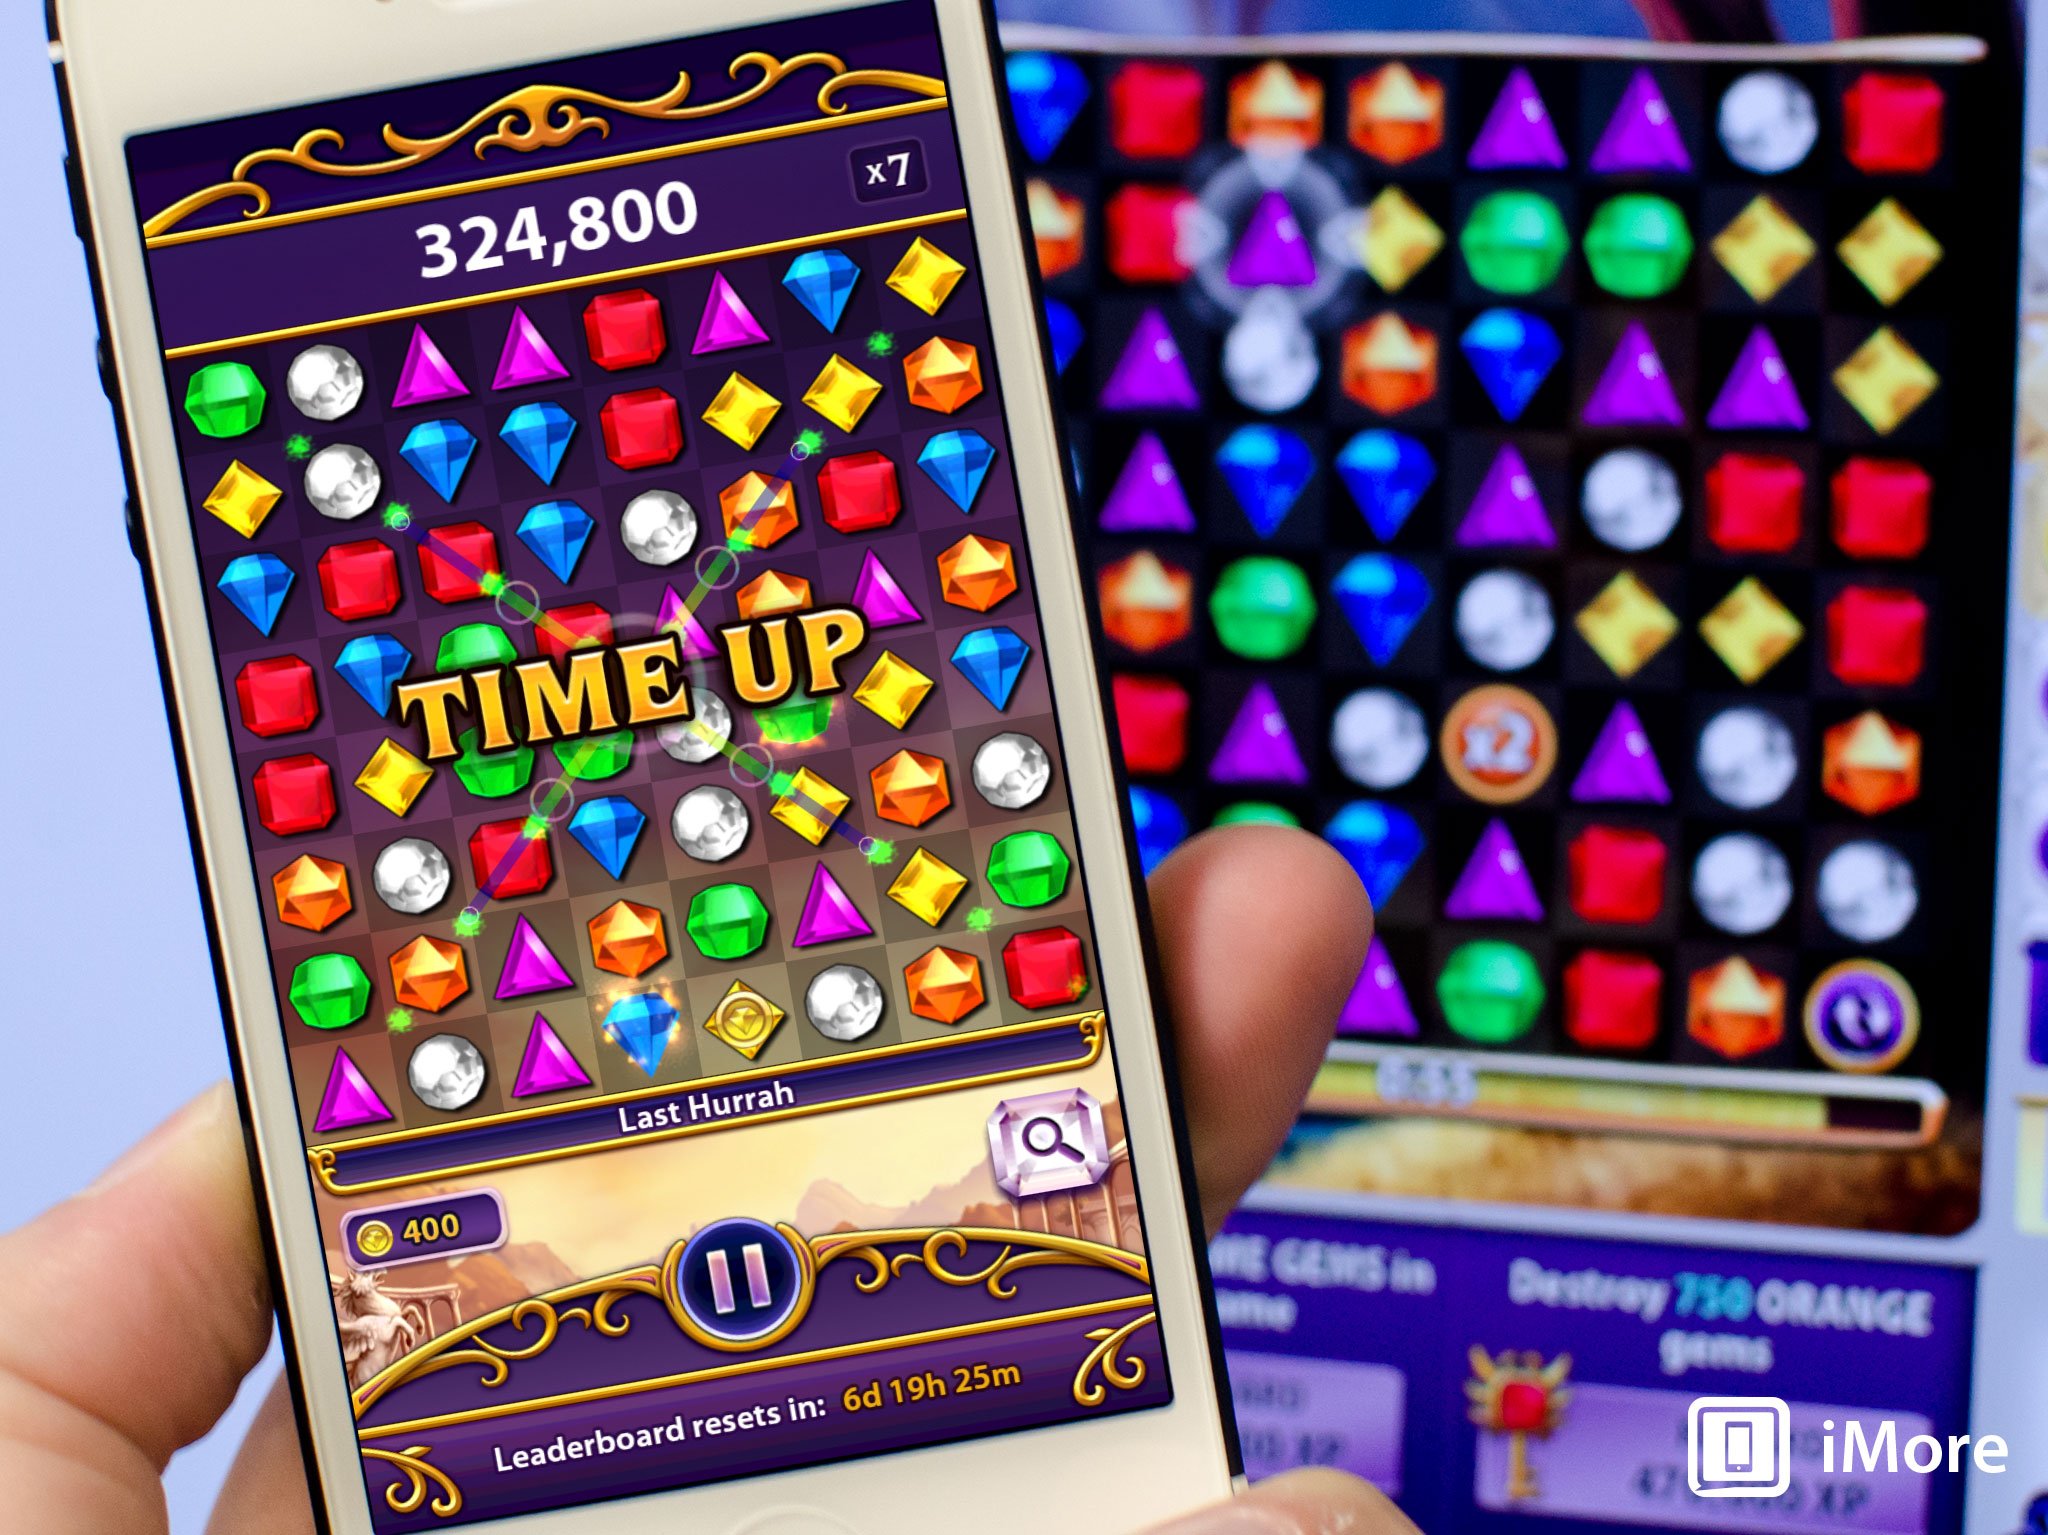 New and updated apps: iMore, Flickr, Bejeweled Blitz, and more!